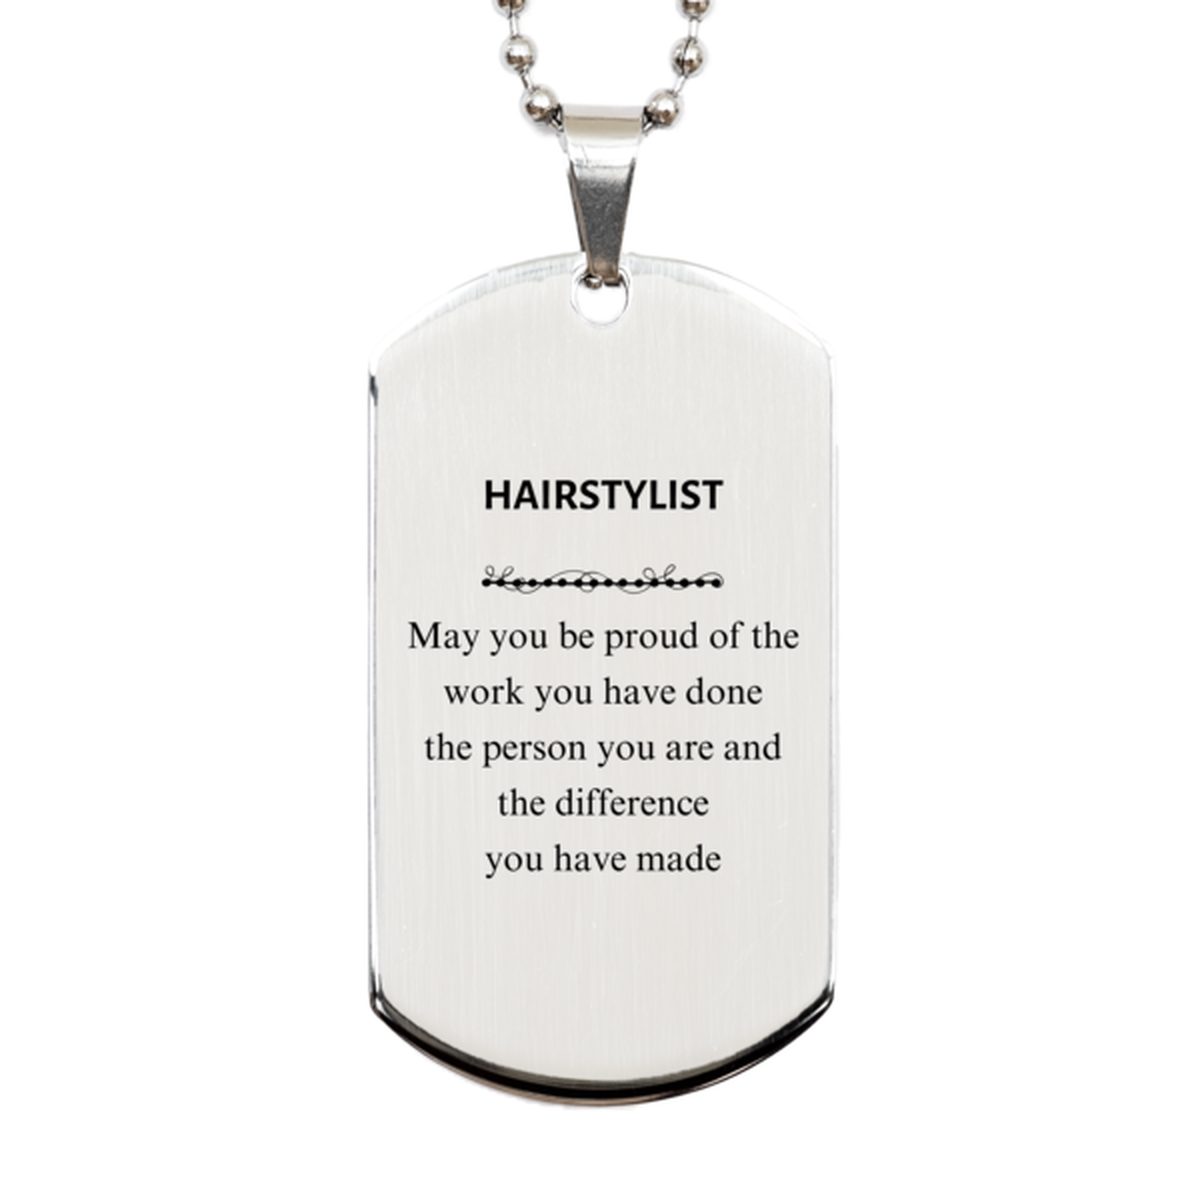 Hairstylist May you be proud of the work you have done, Retirement Hairstylist Silver Dog Tag for Colleague Appreciation Gifts Amazing for Hairstylist